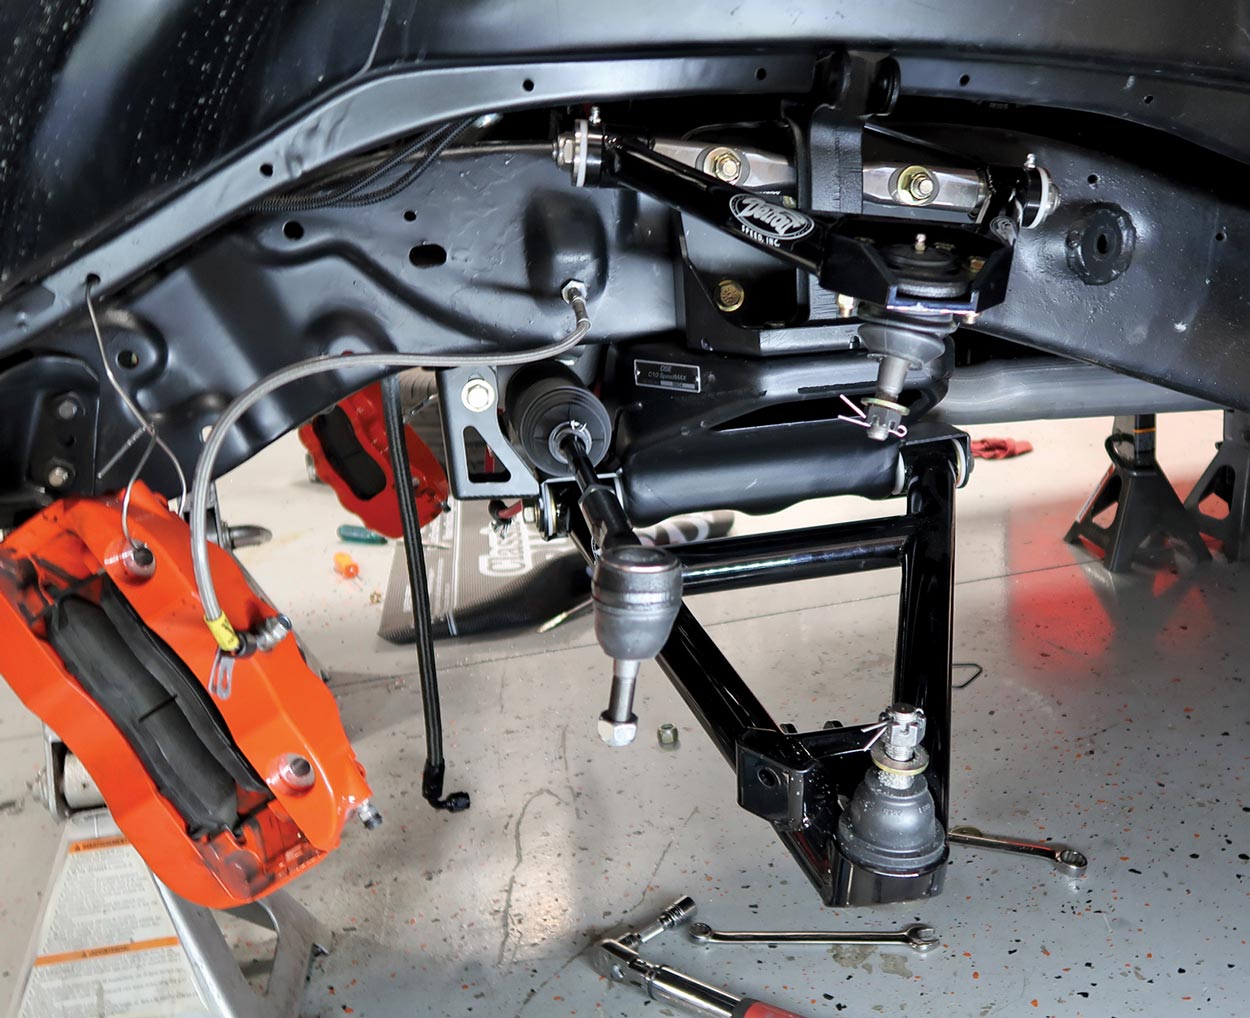 after installing the DSE upper and lower tubular control arms the rack-and-pinion steering was installed